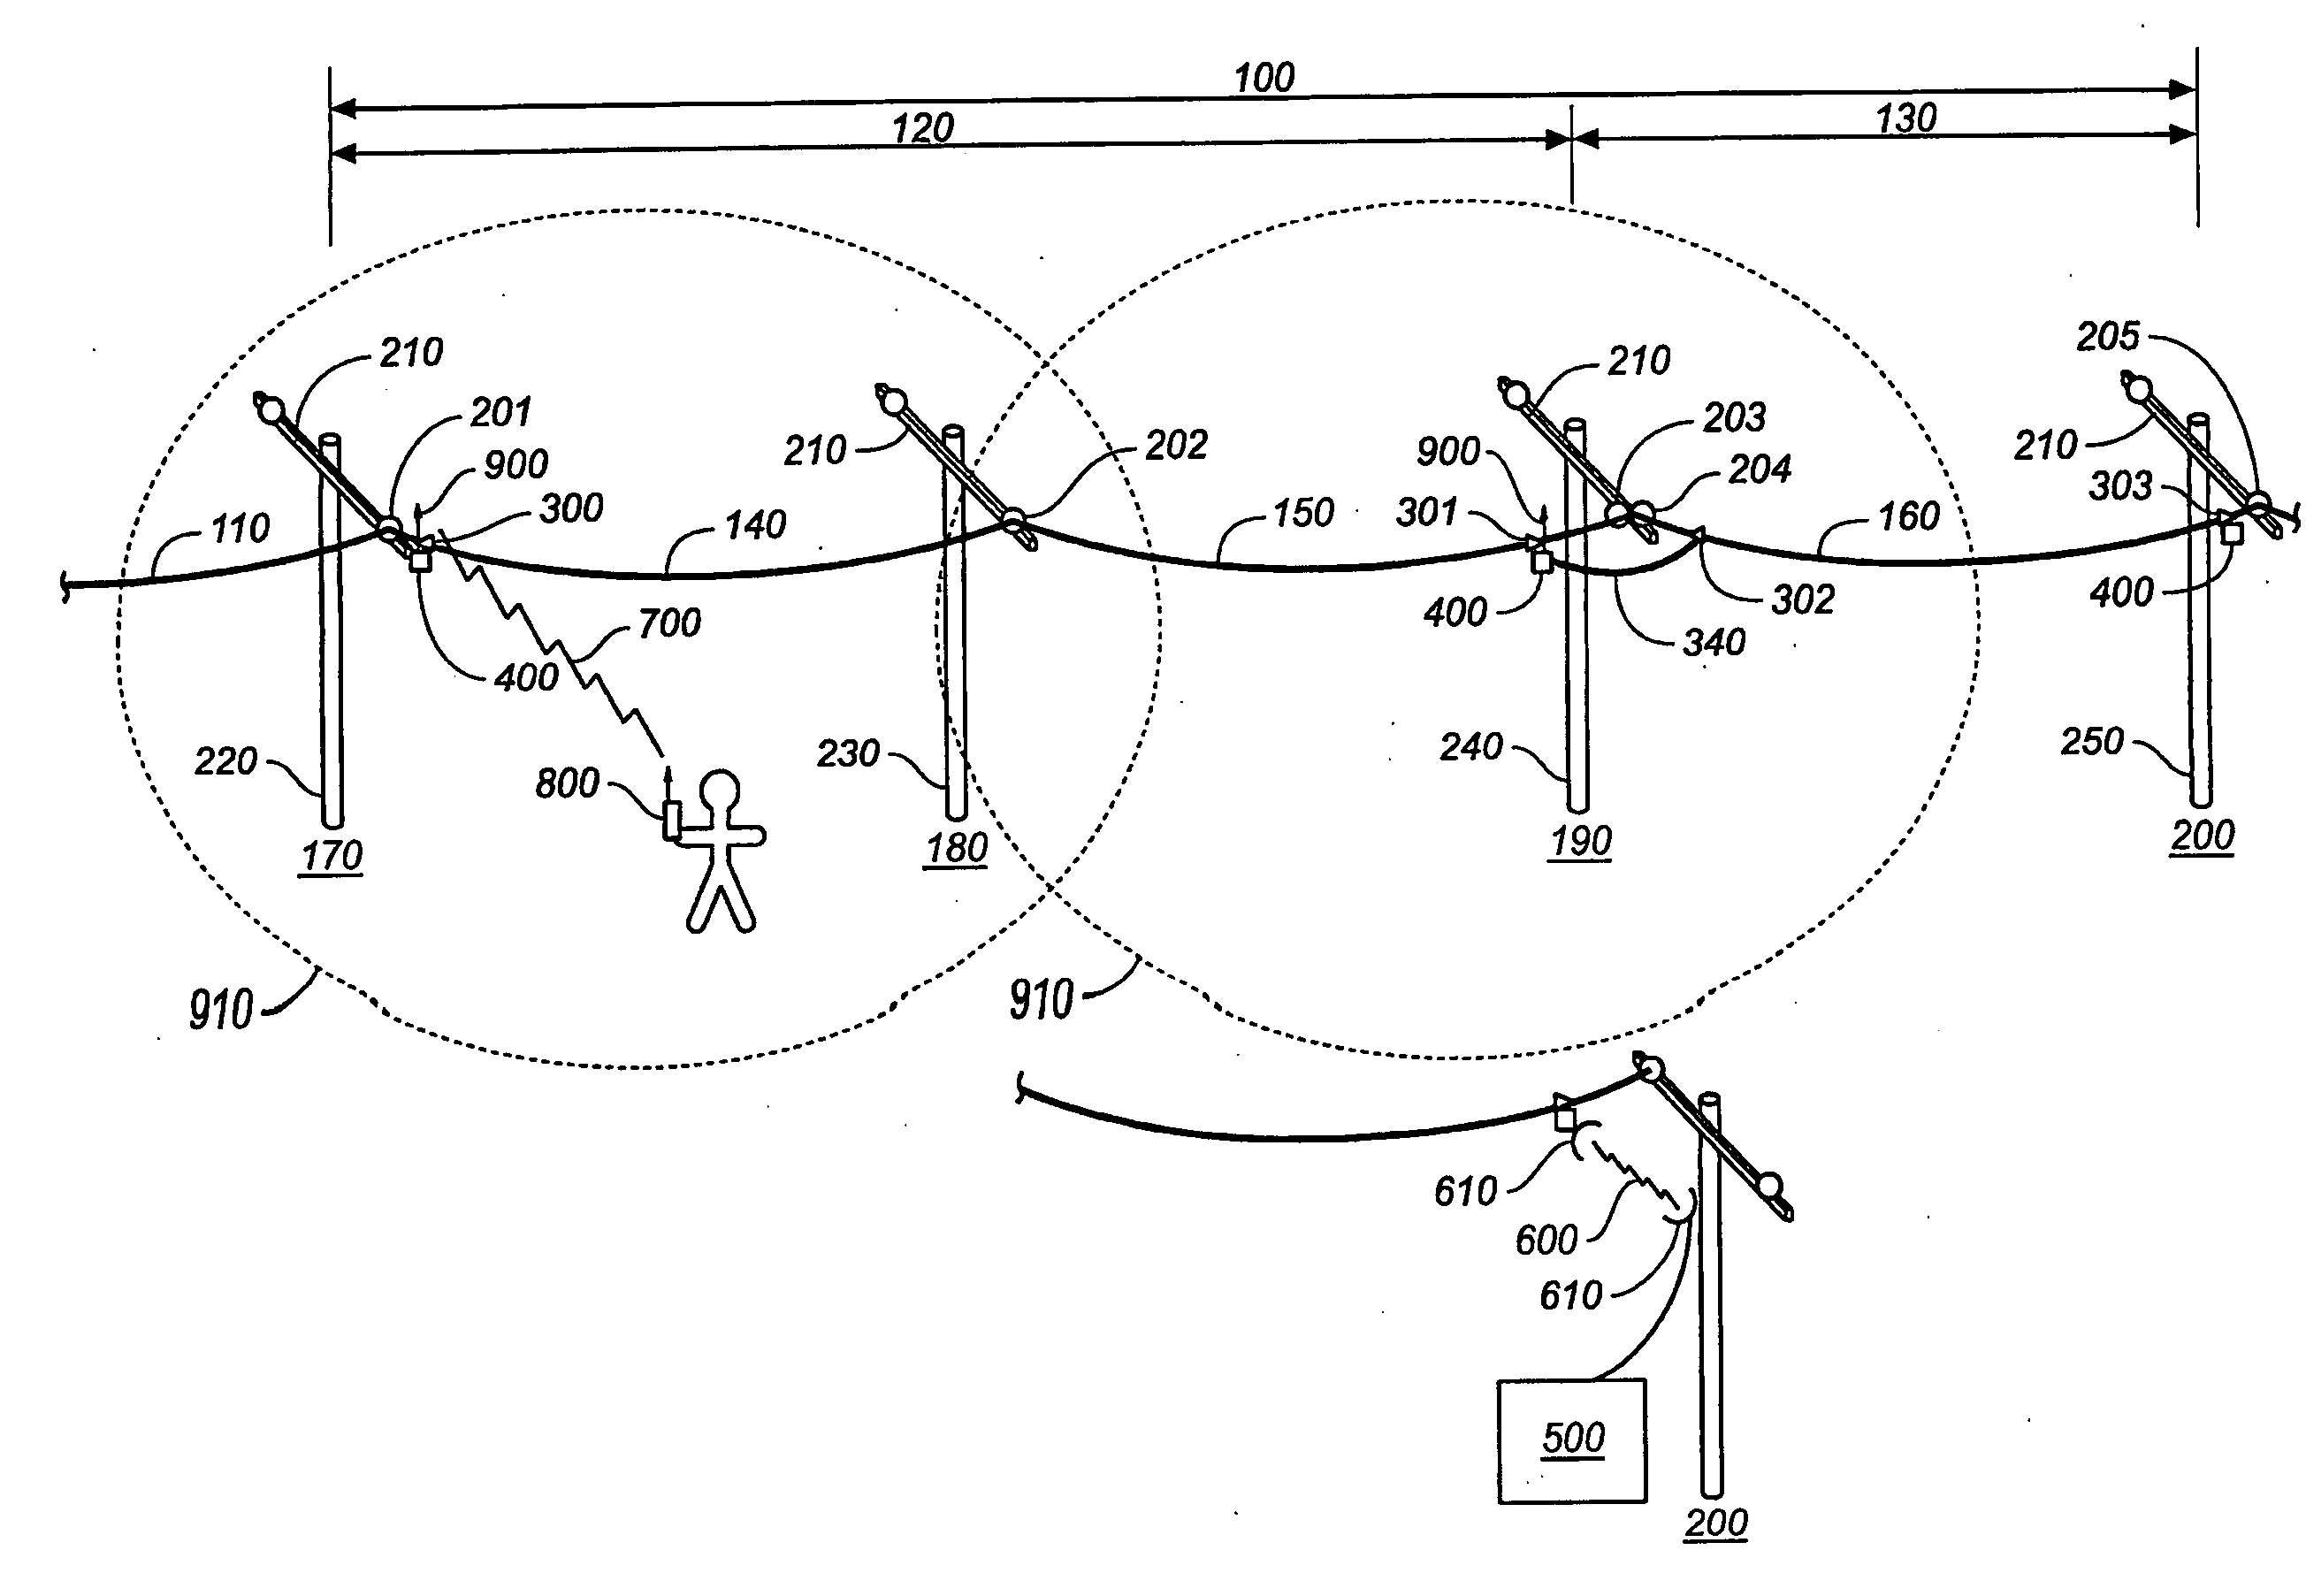 Distributed antenna system using overhead power lines